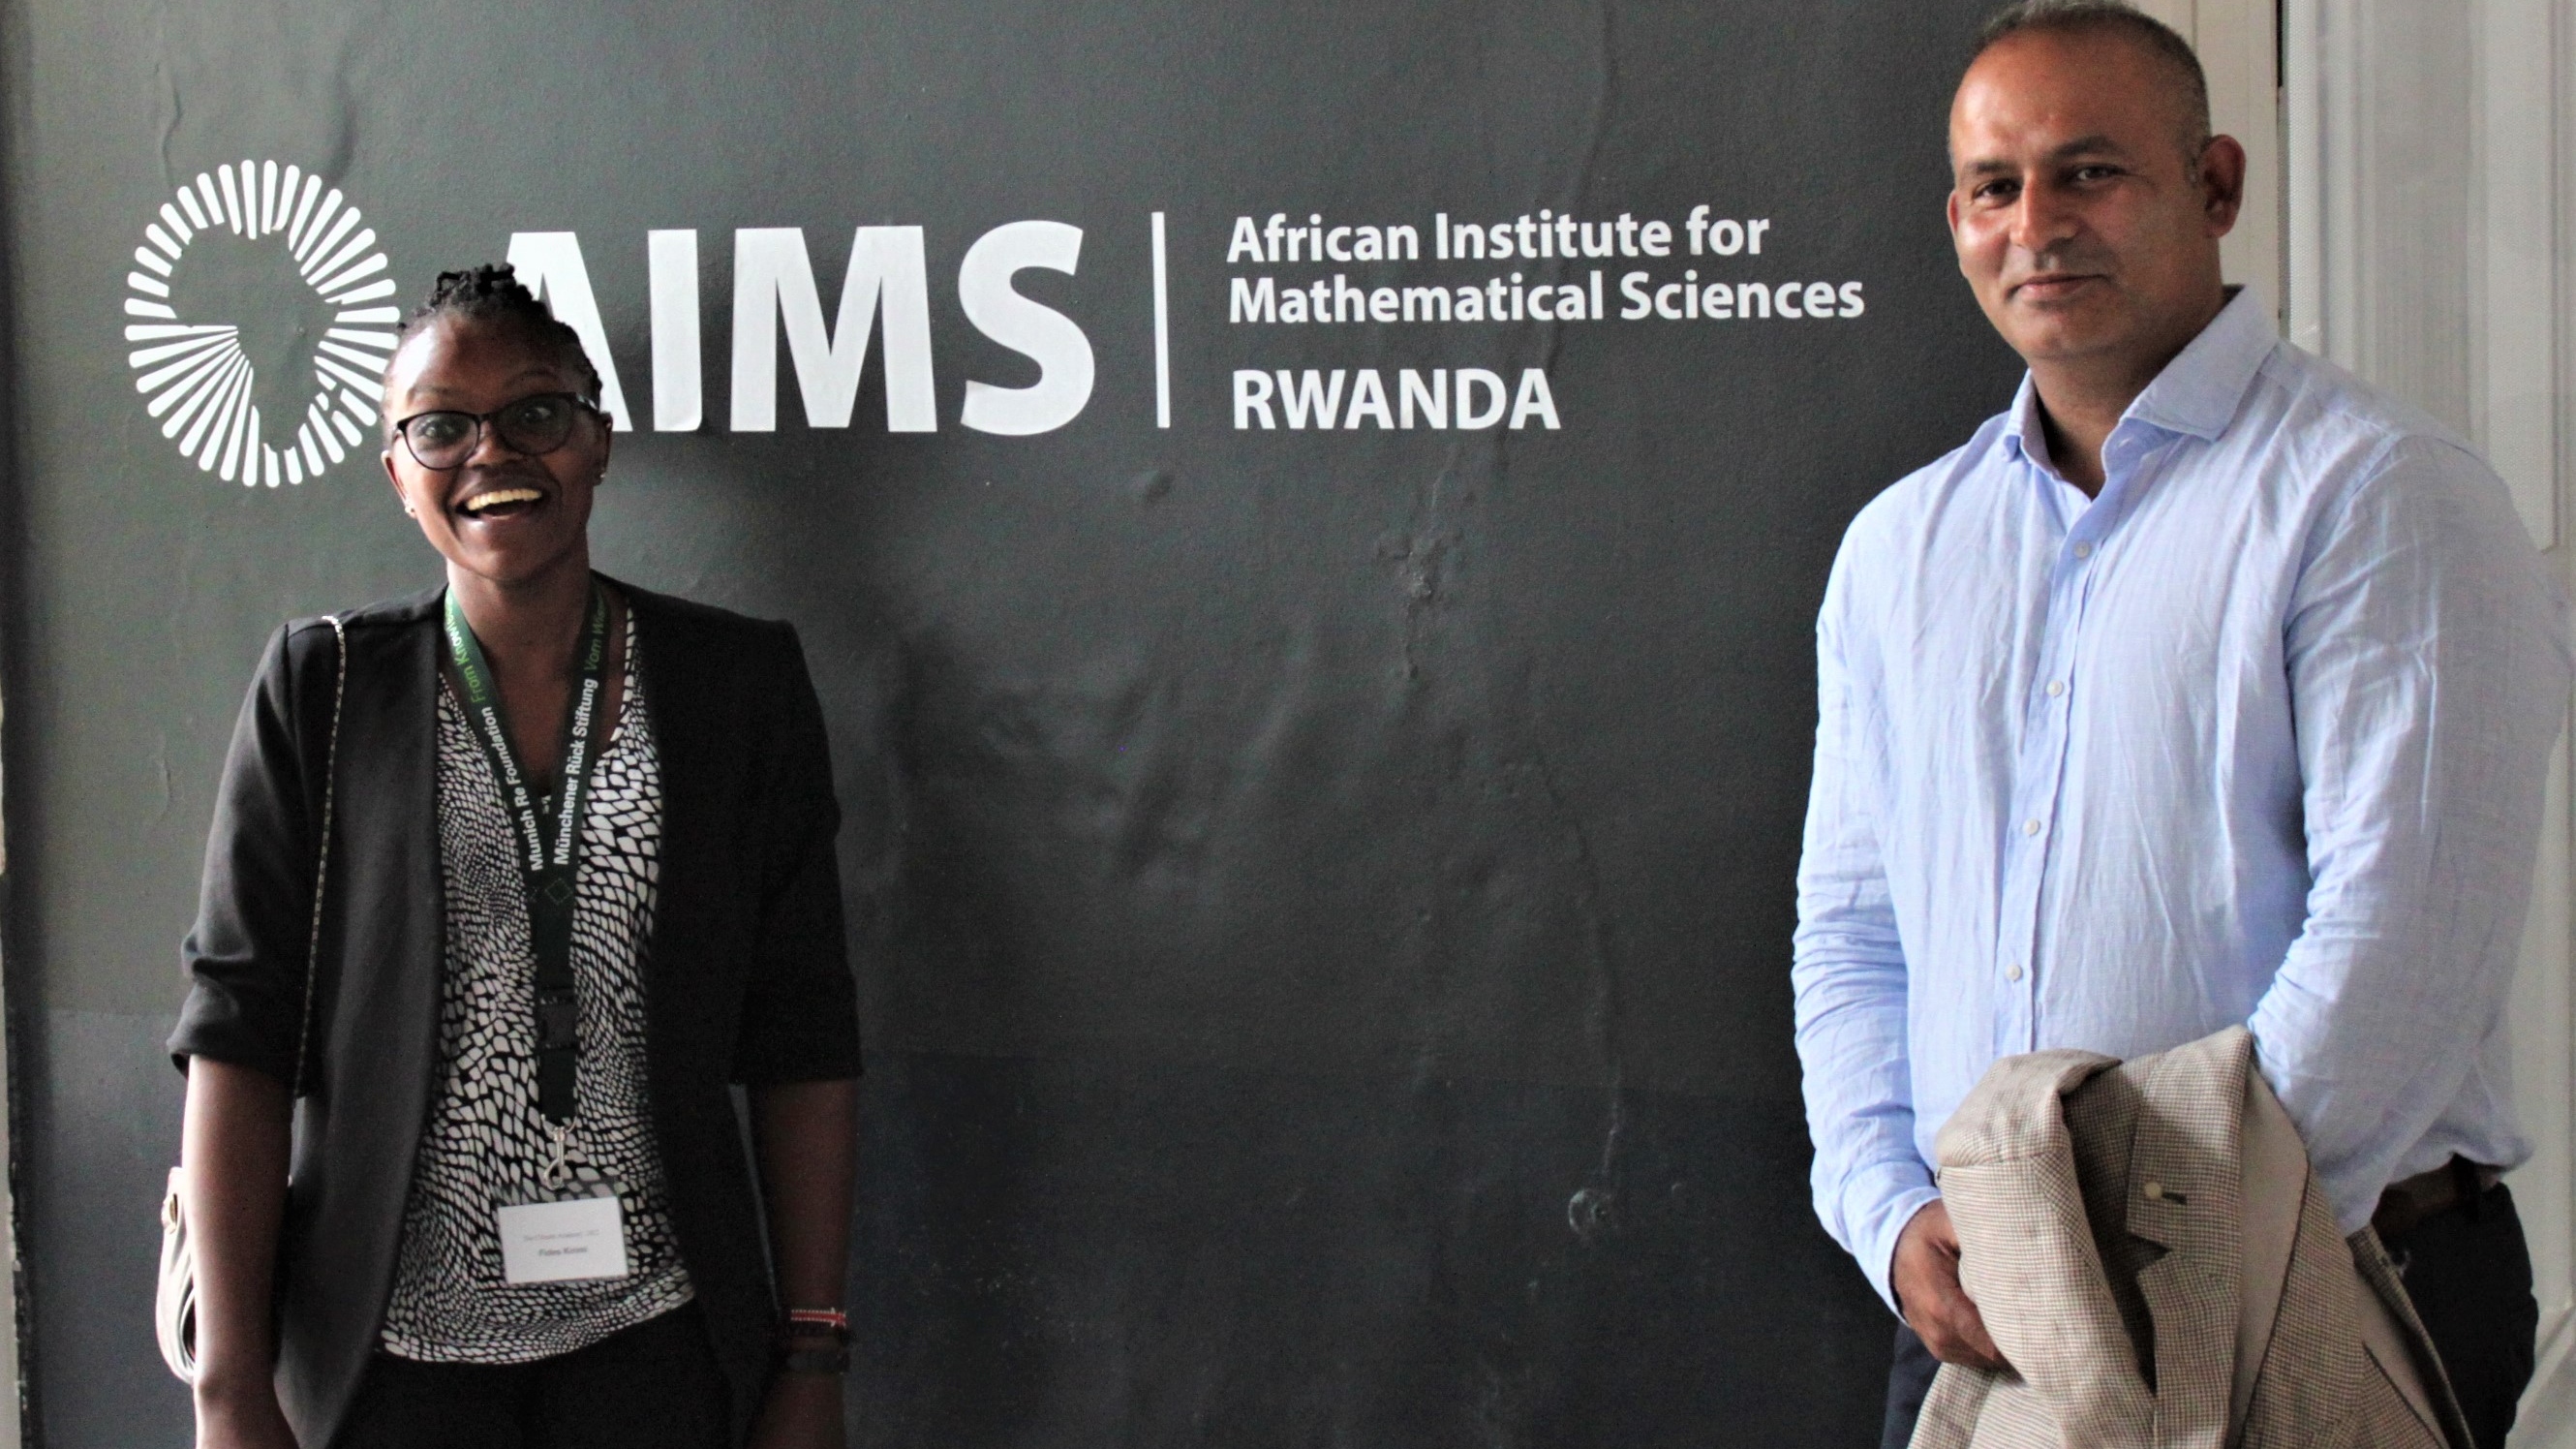 Visit to AIMS